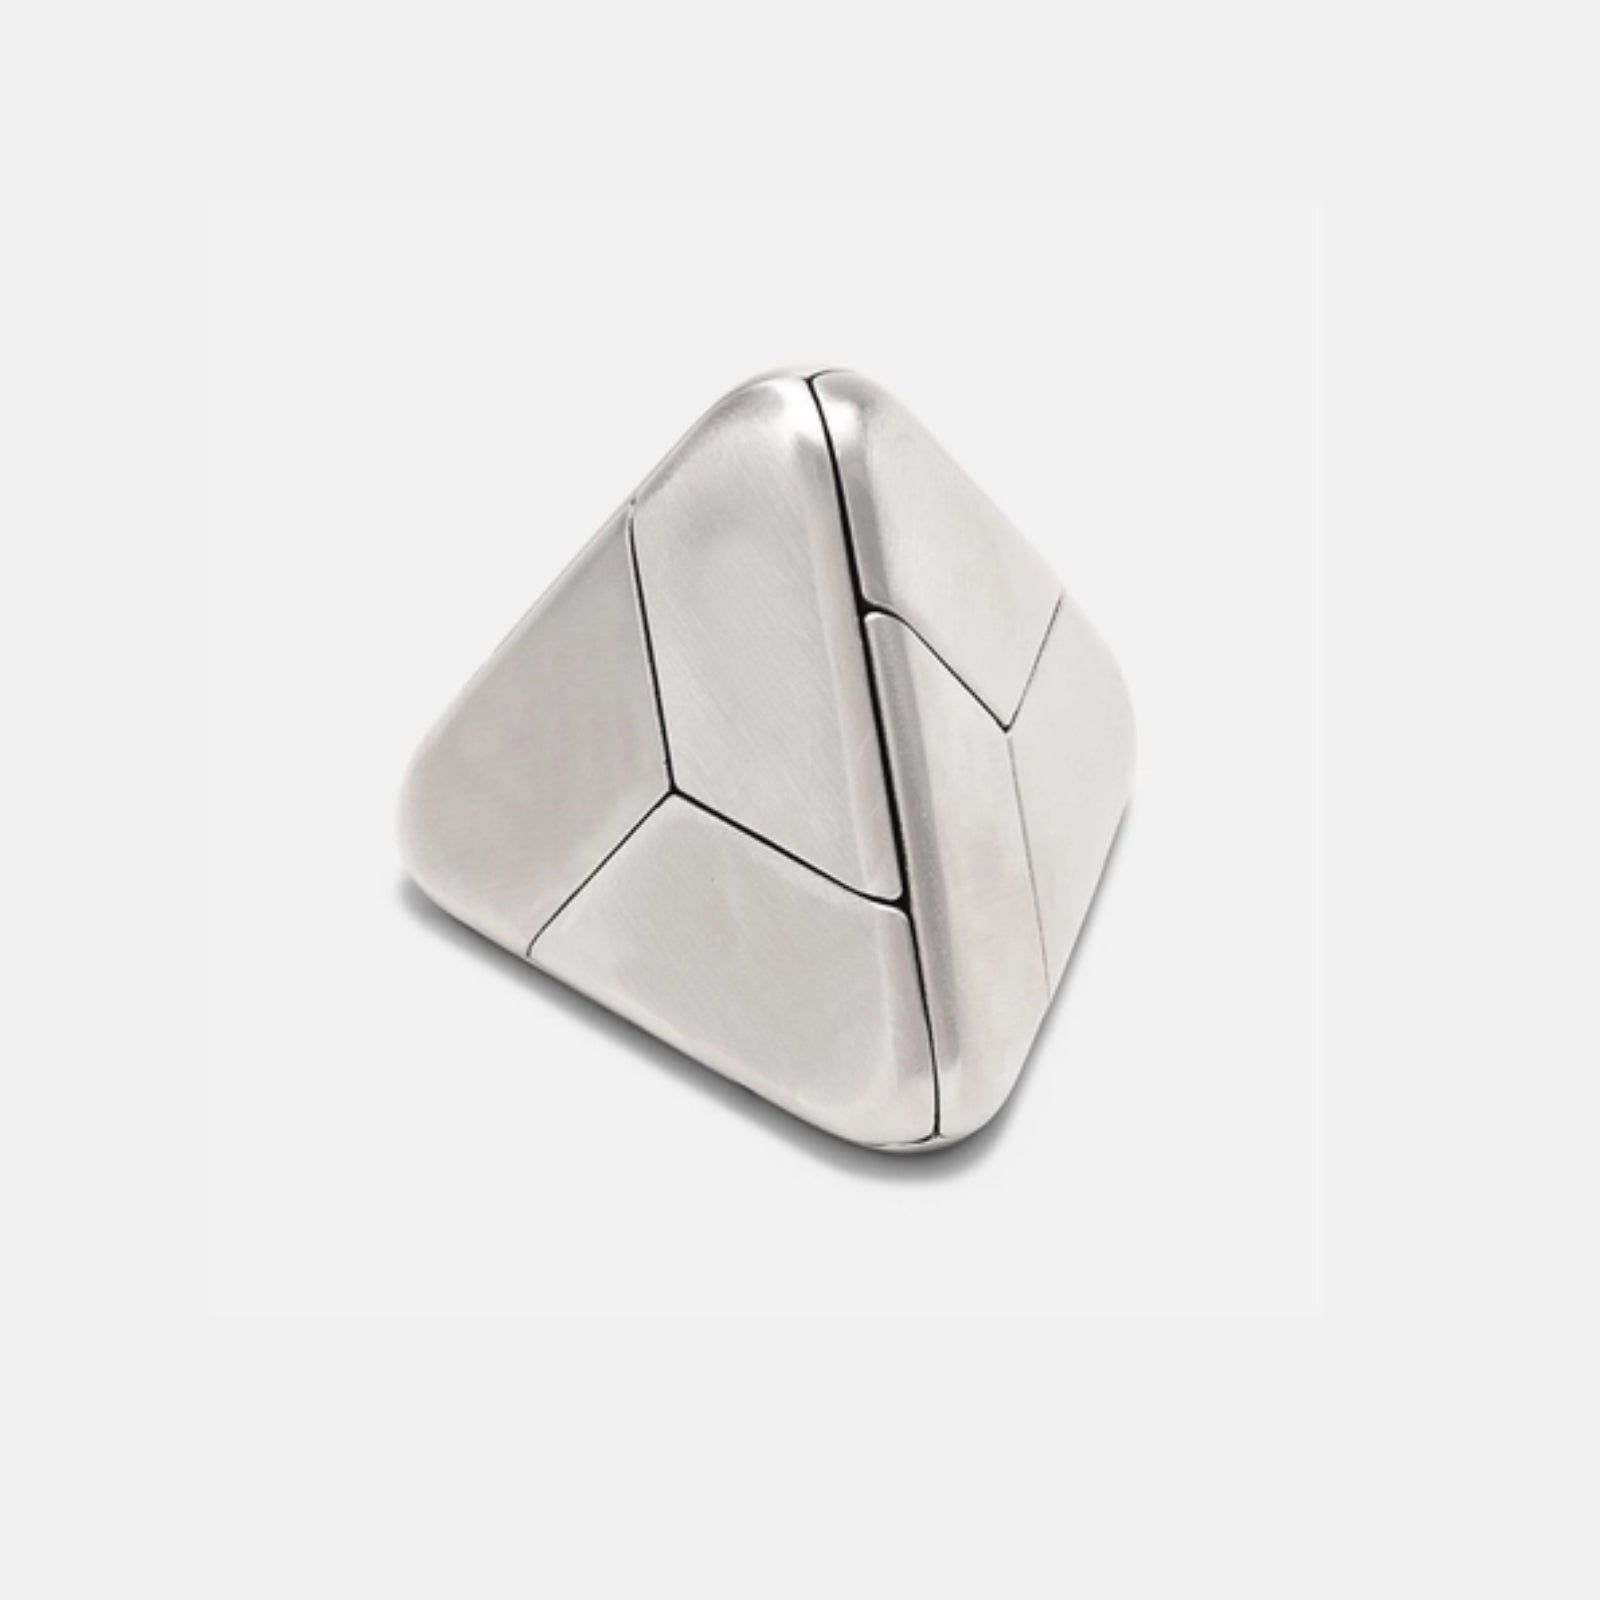 Tetra Puzzle - Stainless Steel - Level 6 - Craighill